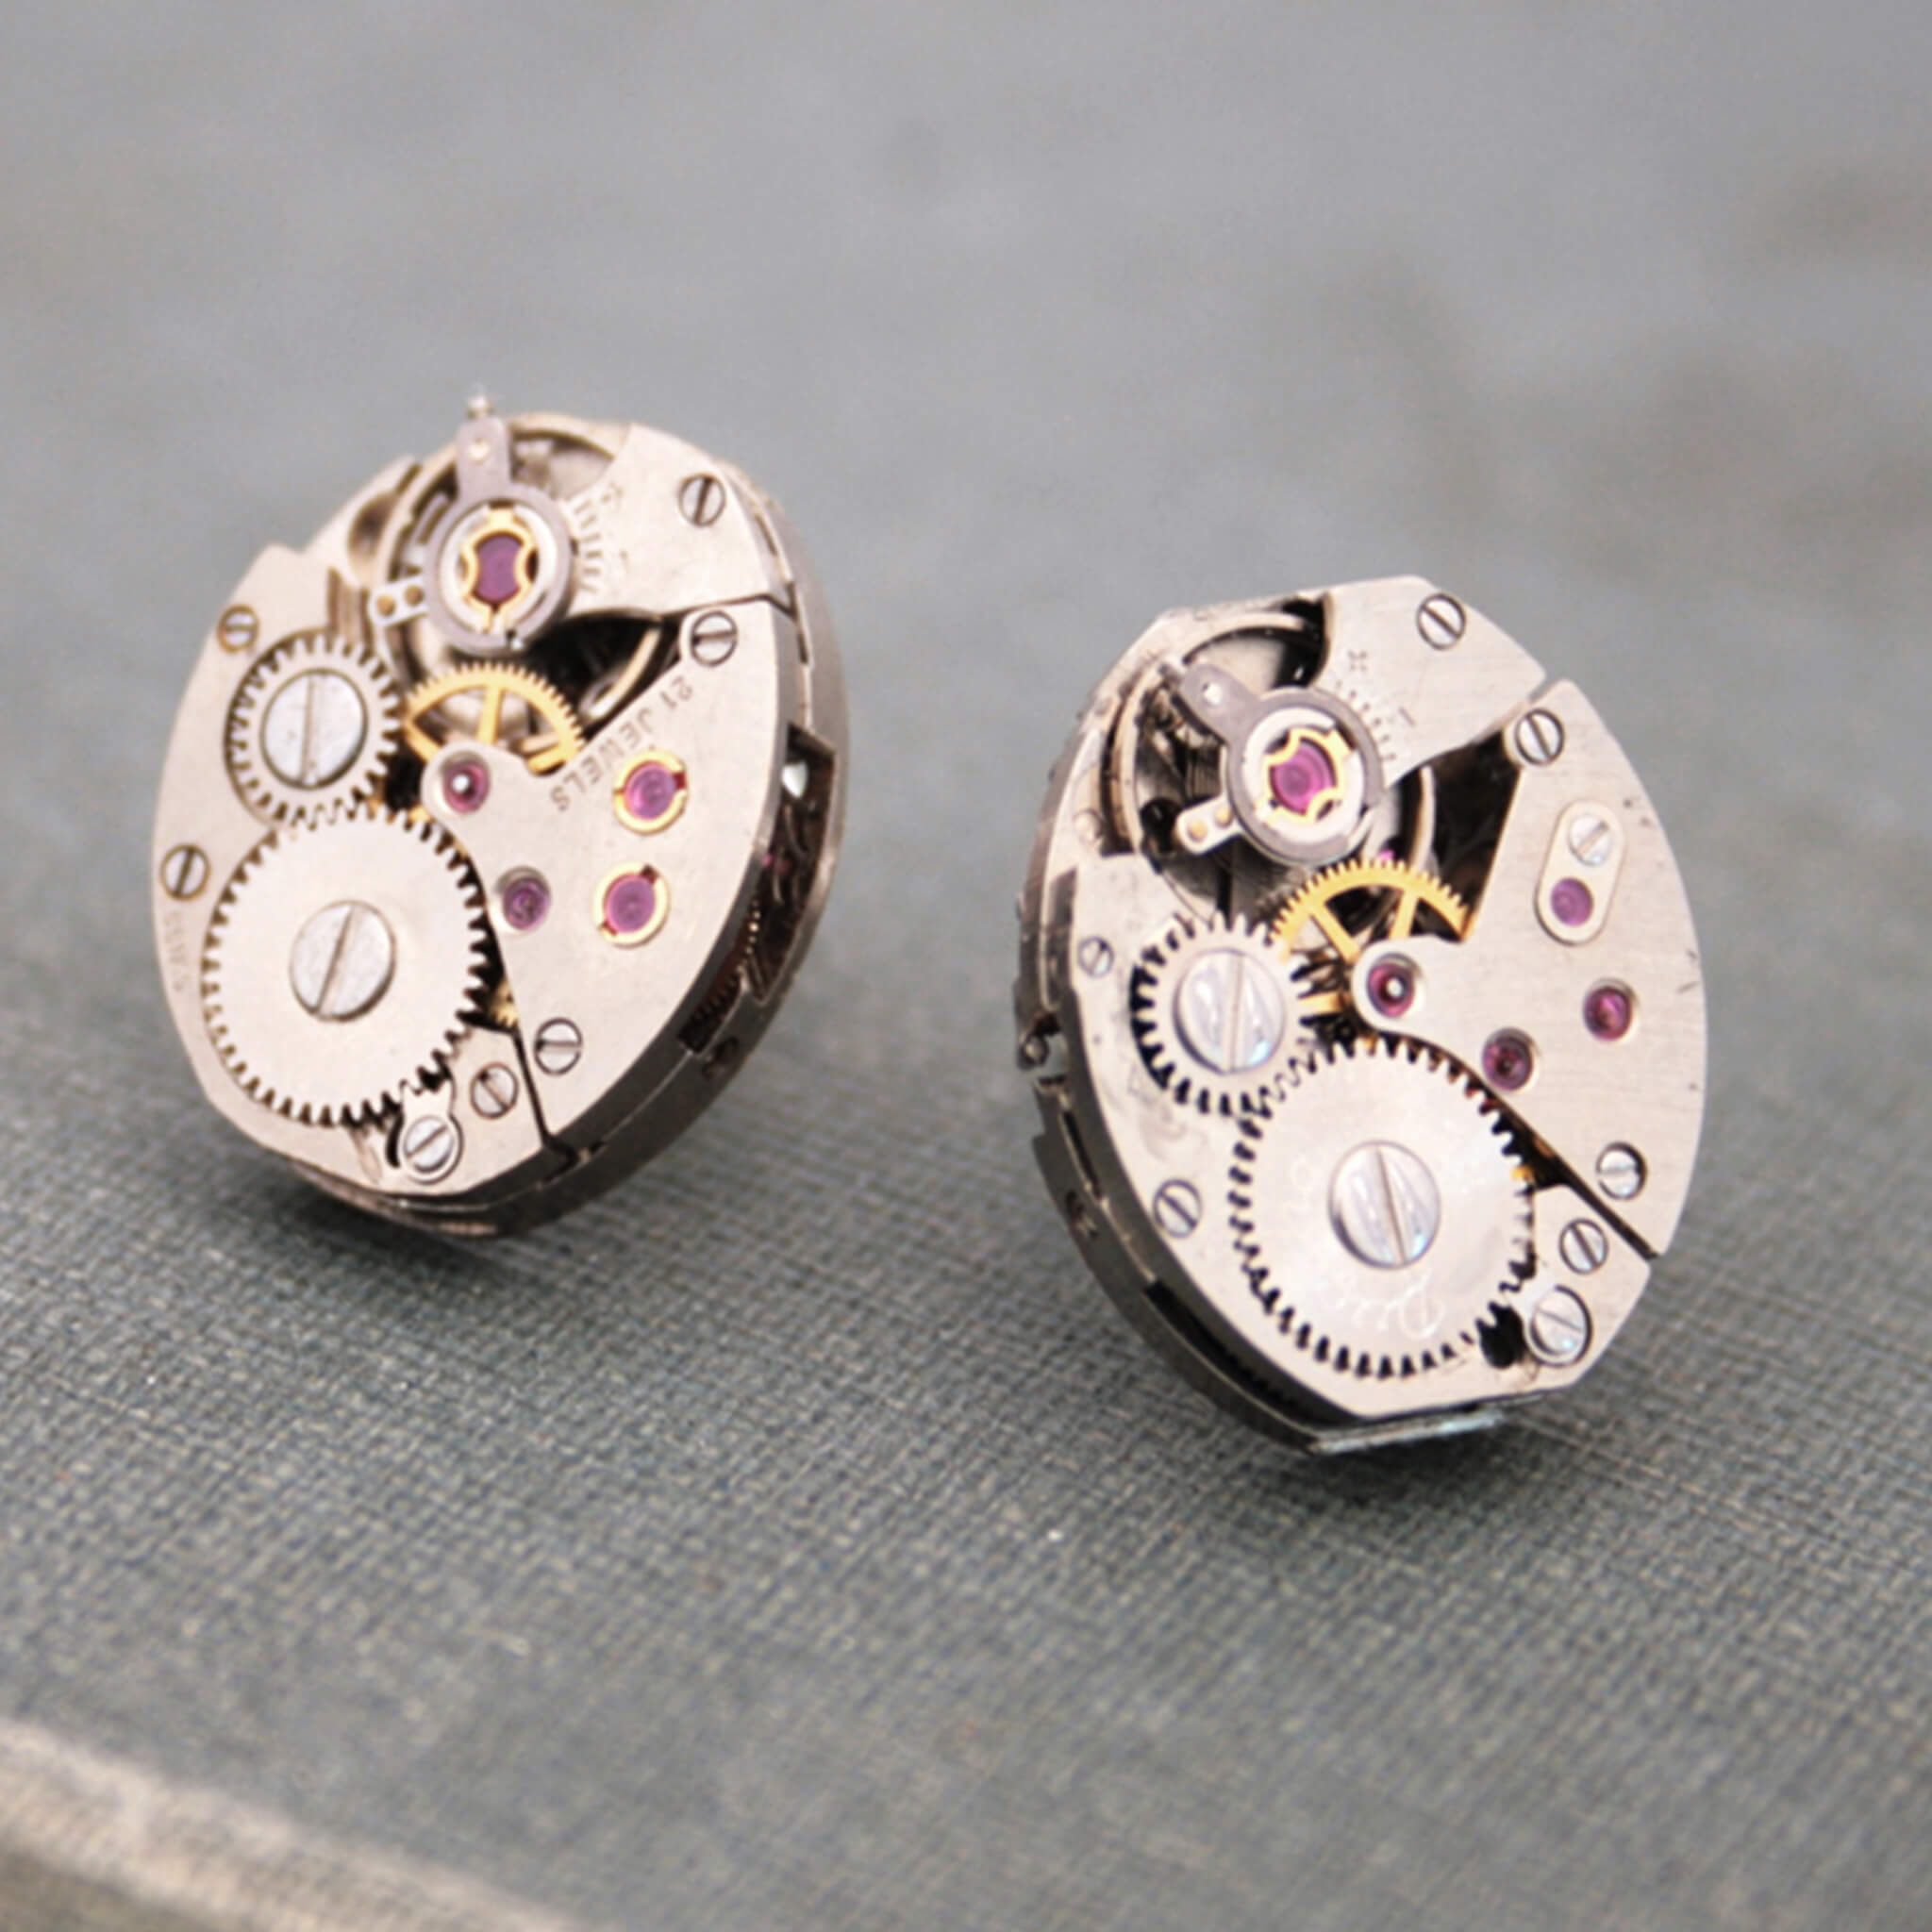 Oval watch movements turned into stud earrings lying on a vintage book